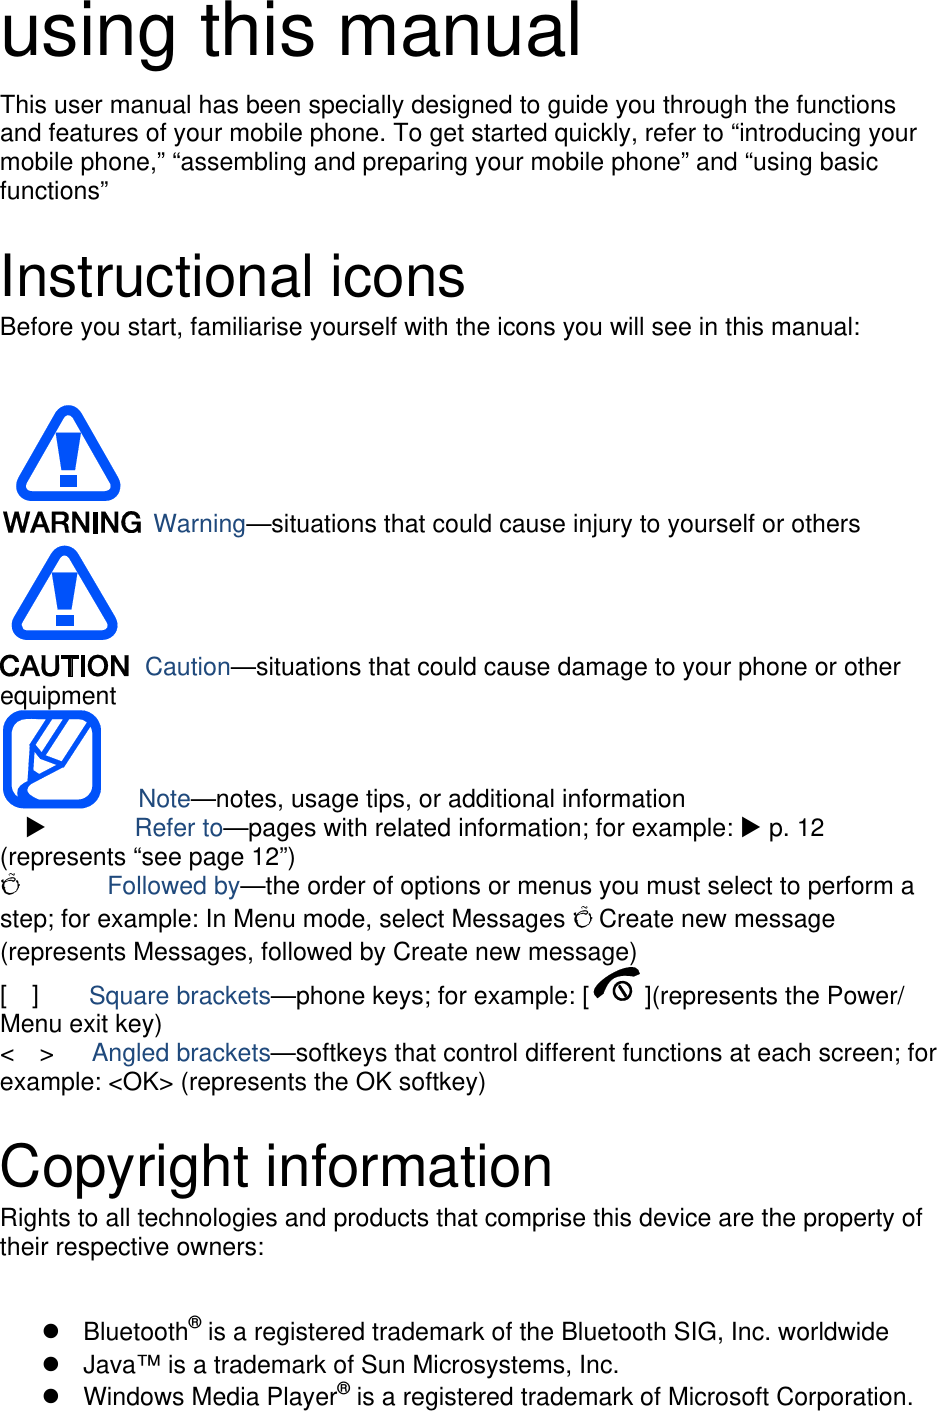 using this manual This user manual has been specially designed to guide you through the functions and features of your mobile phone. To get started quickly, refer to “introducing your mobile phone,” “assembling and preparing your mobile phone” and “using basic functions”  Instructional icons Before you start, familiarise yourself with the icons you will see in this manual:     Warning—situations that could cause injury to yourself or others  Caution—situations that could cause damage to your phone or other equipment    Note—notes, usage tips, or additional information   X       Refer to—pages with related information; for example: X p. 12 (represents “see page 12”) Õ       Followed by—the order of options or menus you must select to perform a step; for example: In Menu mode, select Messages Õ Create new message (represents Messages, followed by Create new message) [  ]    Square brackets—phone keys; for example: [ ](represents the Power/ Menu exit key) &lt;  &gt;   Angled brackets—softkeys that control different functions at each screen; for example: &lt;OK&gt; (represents the OK softkey)  Copyright information Rights to all technologies and products that comprise this device are the property of their respective owners:  z Bluetooth® is a registered trademark of the Bluetooth SIG, Inc. worldwide z  Java™ is a trademark of Sun Microsystems, Inc. z Windows Media Player® is a registered trademark of Microsoft Corporation. 